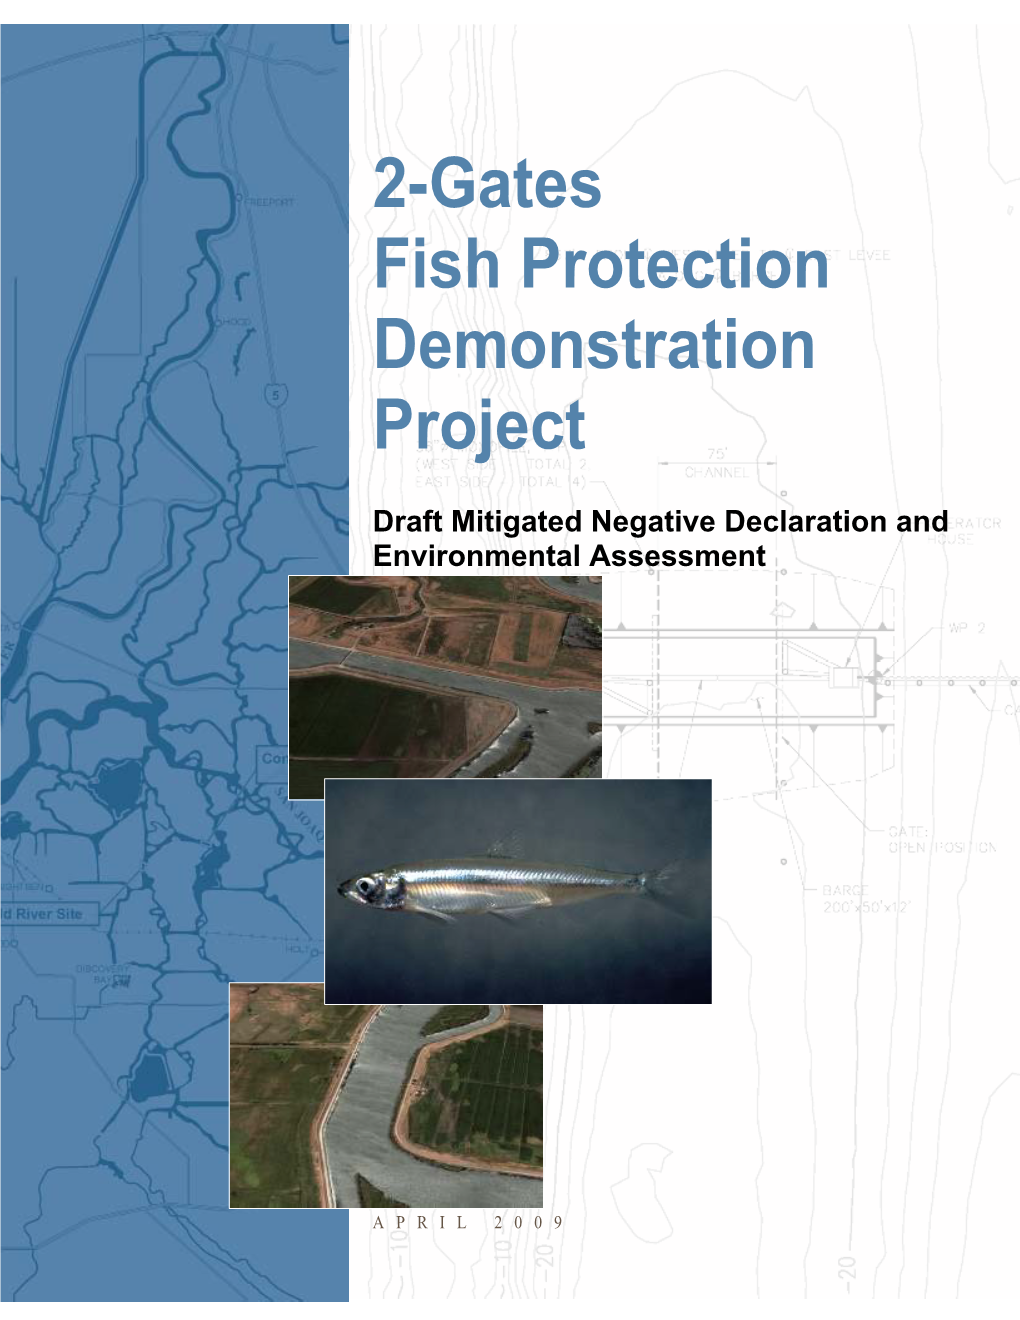 2-Gates Fish Protection Demonstration Project Draft